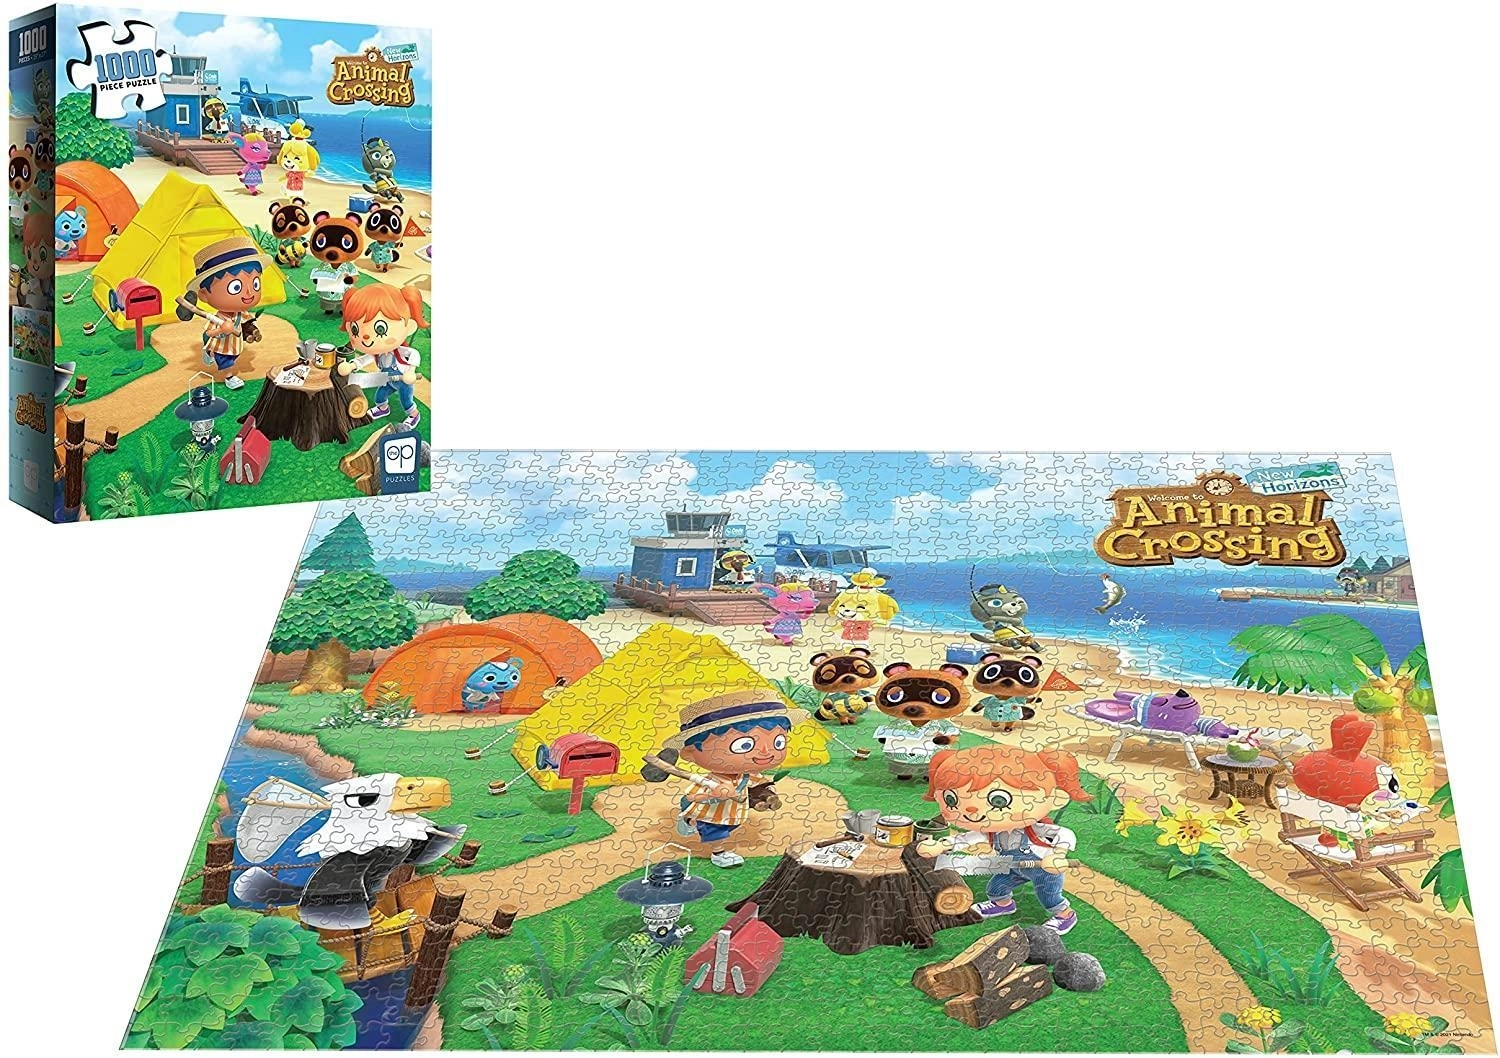 Animal Crossing: New Horizons - Welcome to Animal Crossing